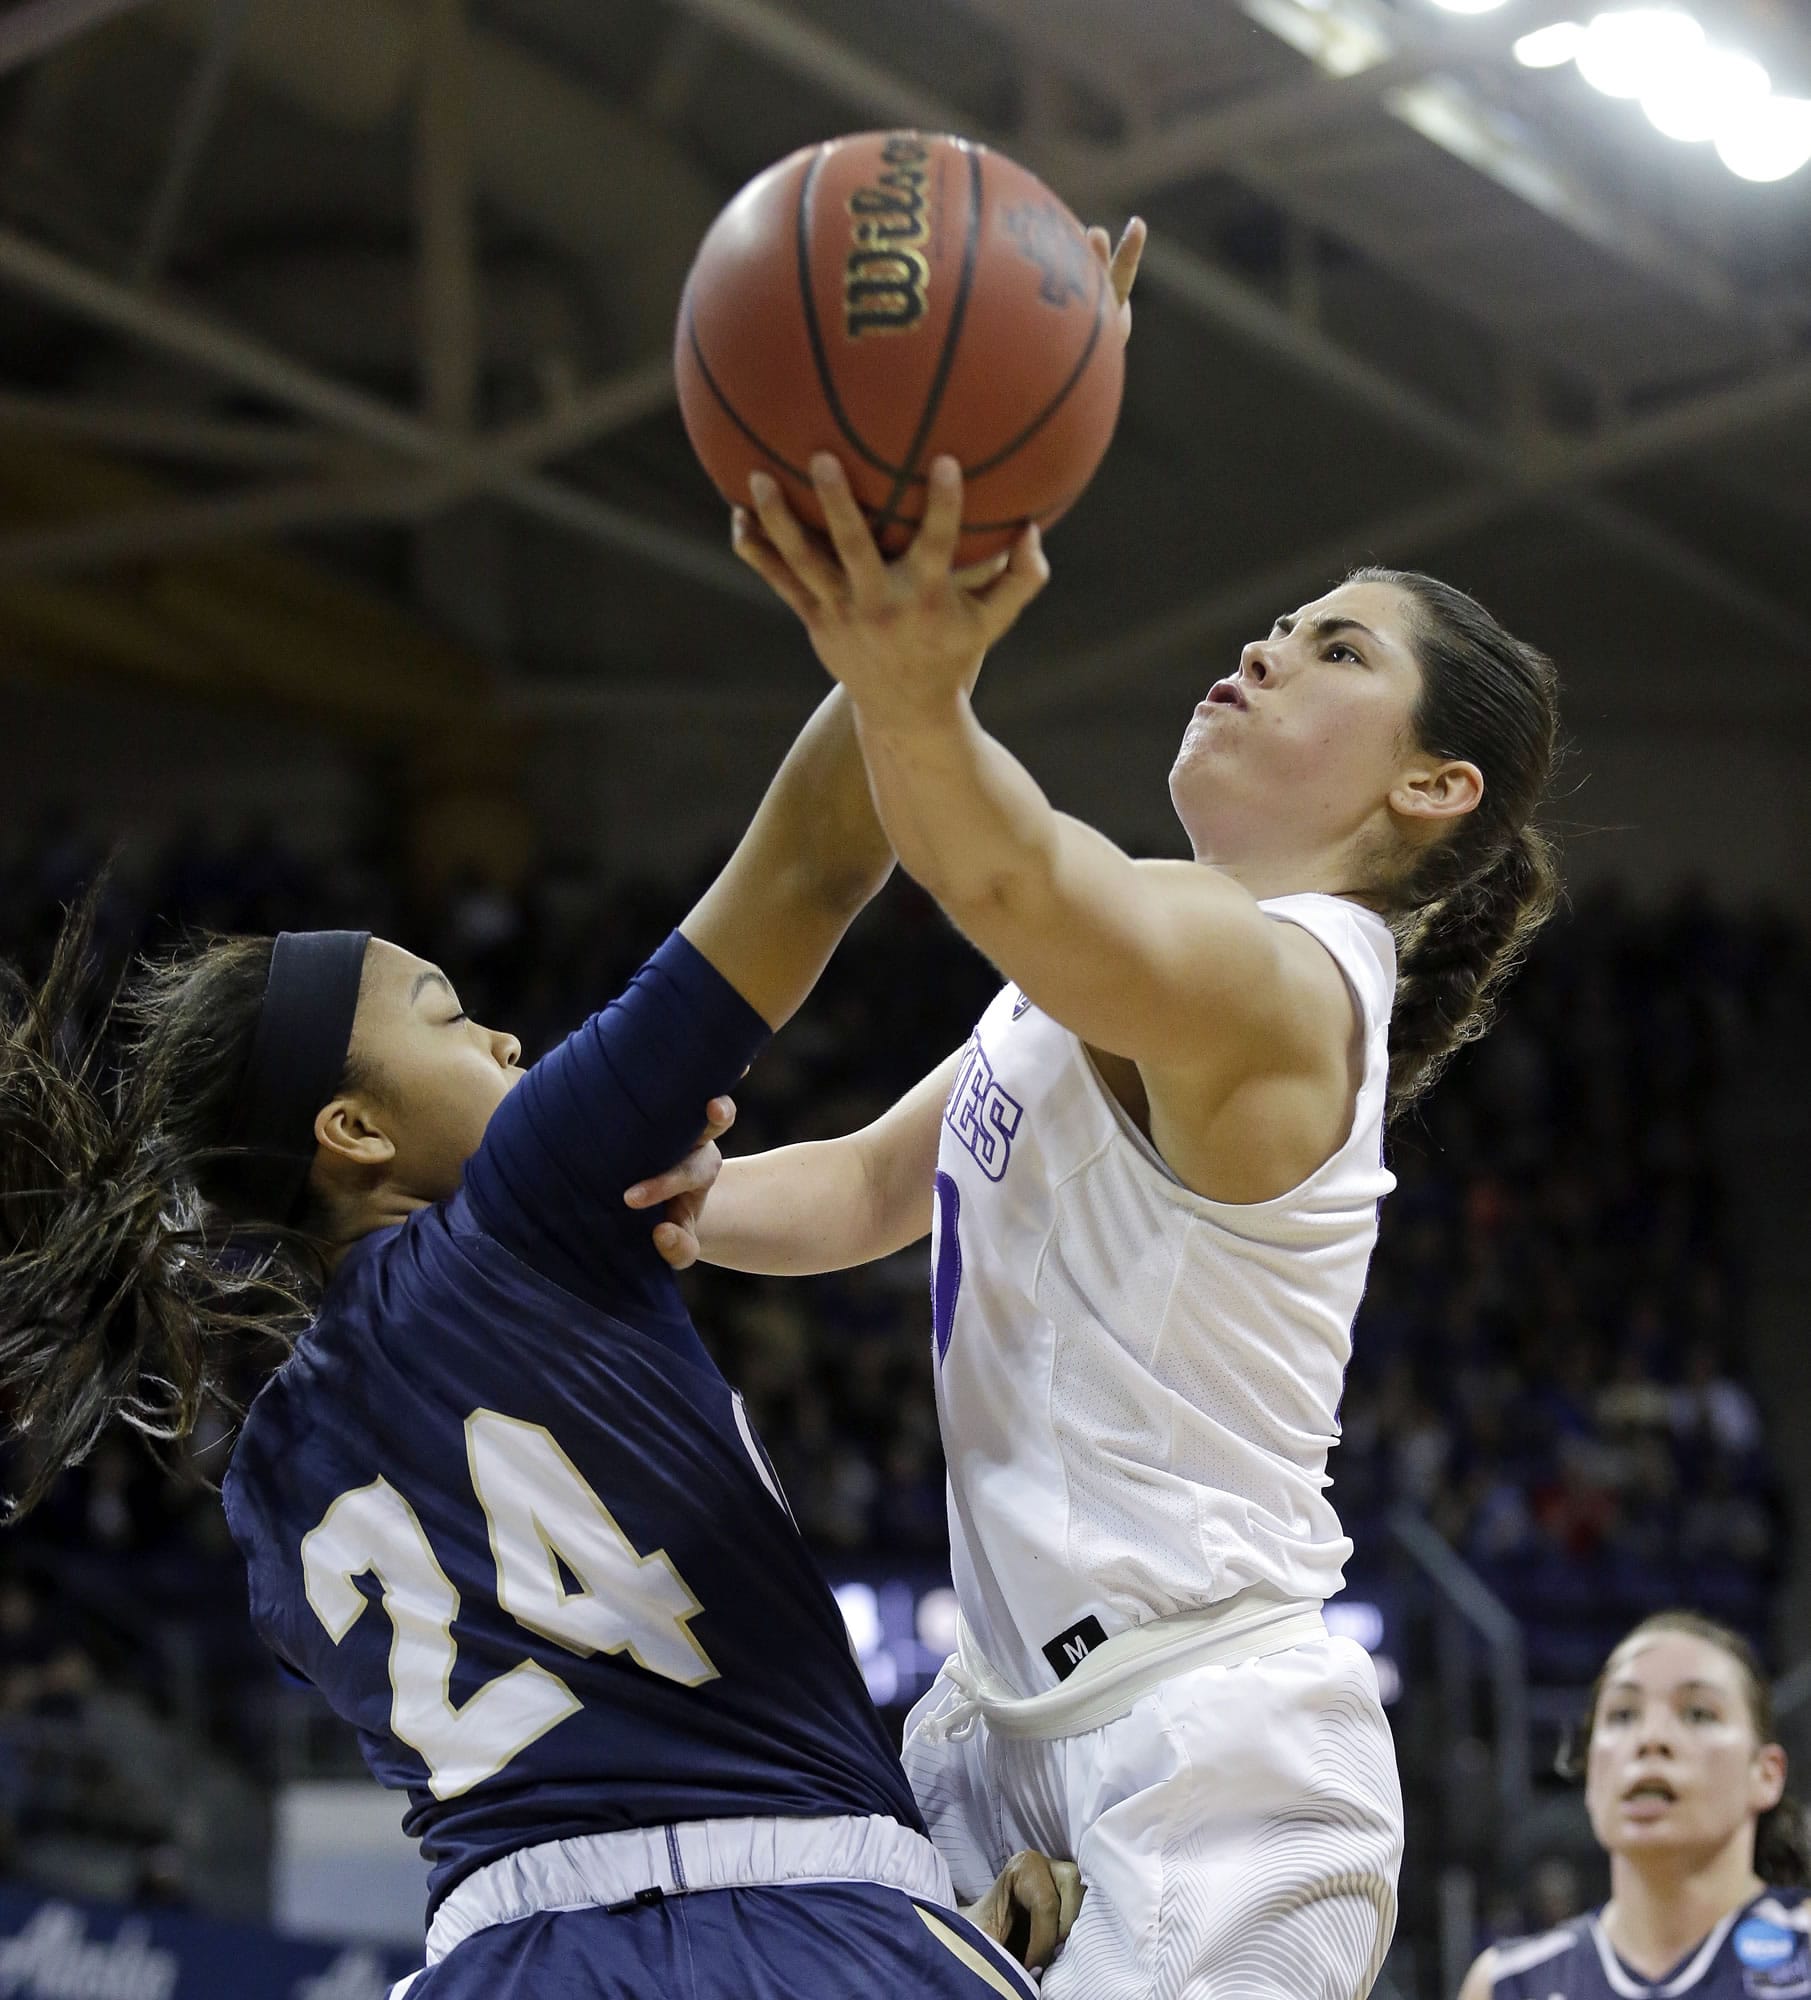 Washington's Kelsey Plum, right, drives as Montana State's Oliana Squires defends during the second half of a first-round game in the NCAA women's college basketball tournament Saturday, March 18, 2017, in Seattle. Washington won 91-63.